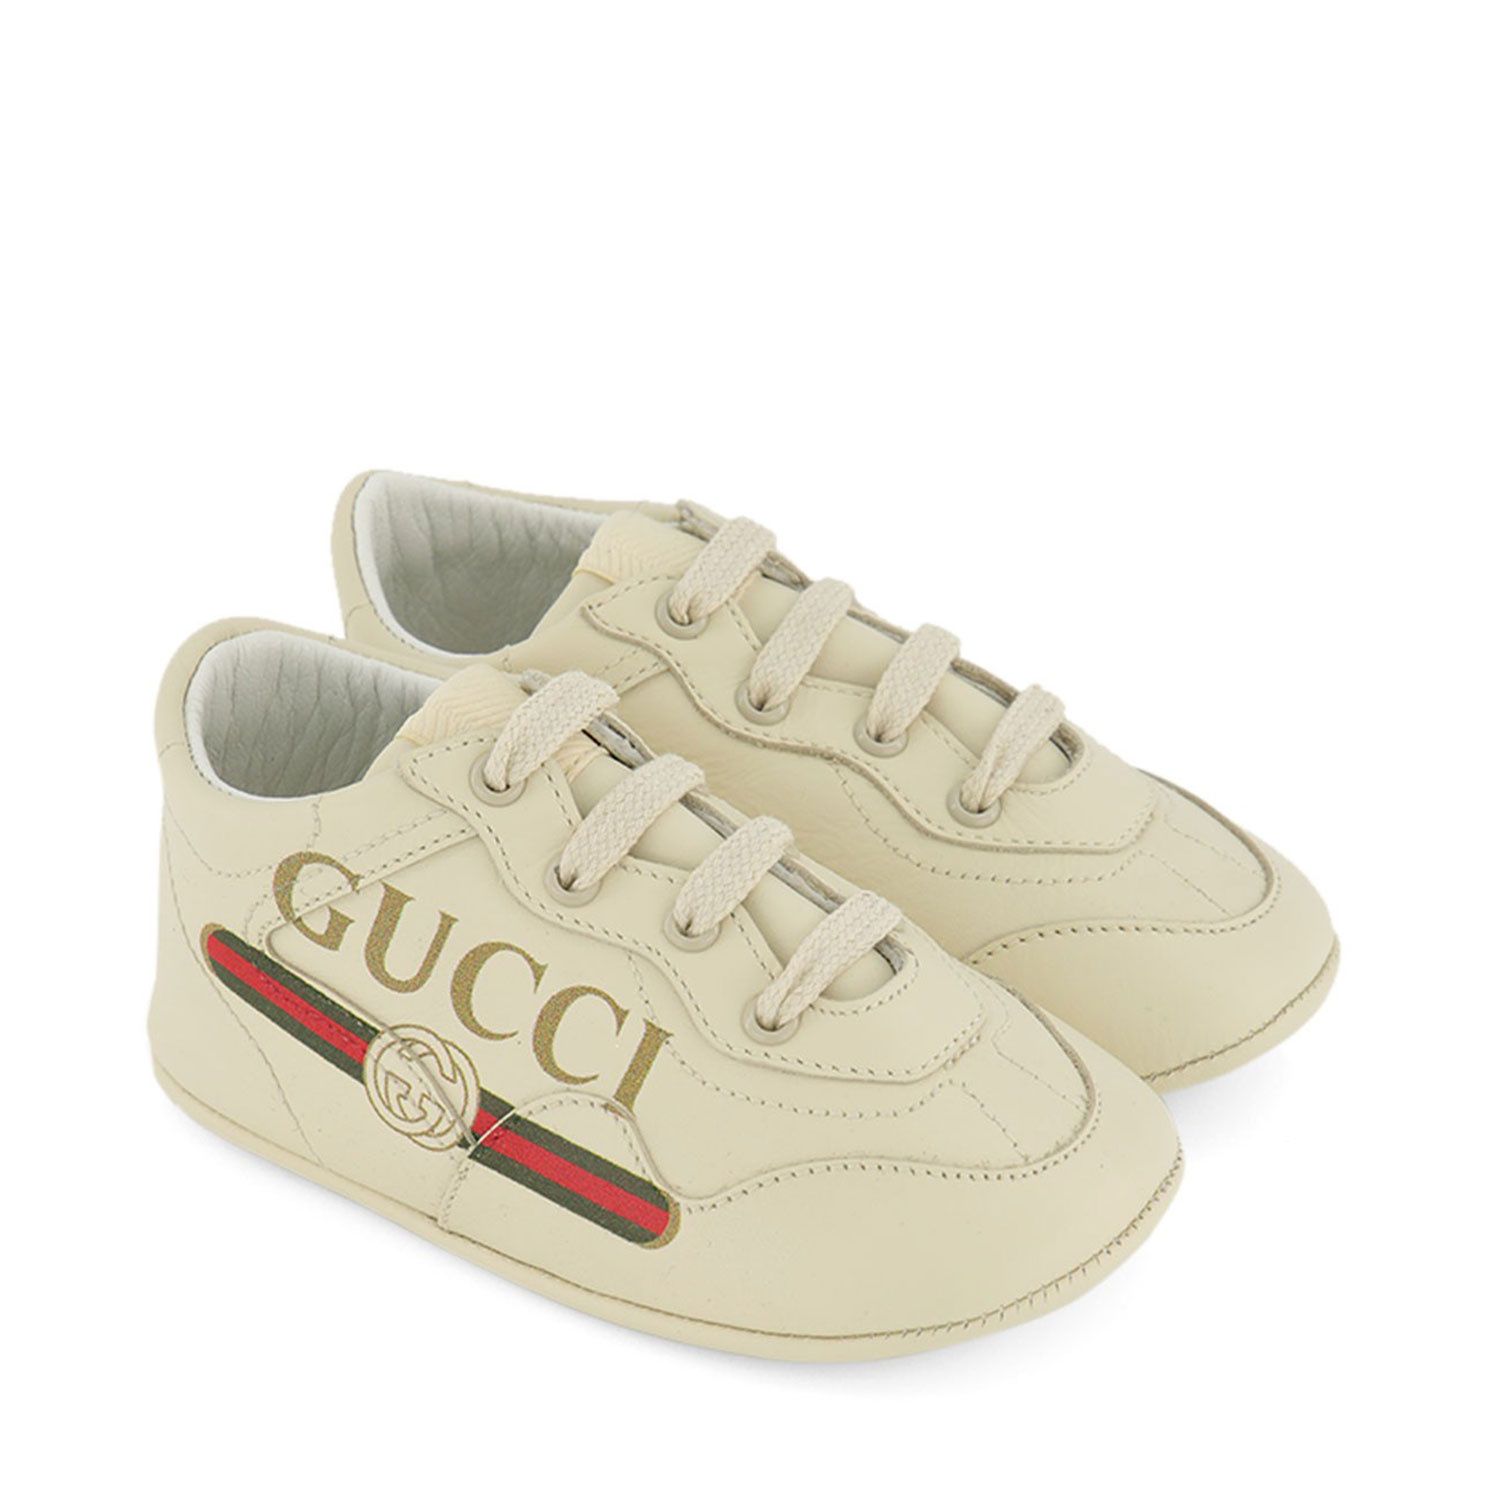 white gucci baby shoes